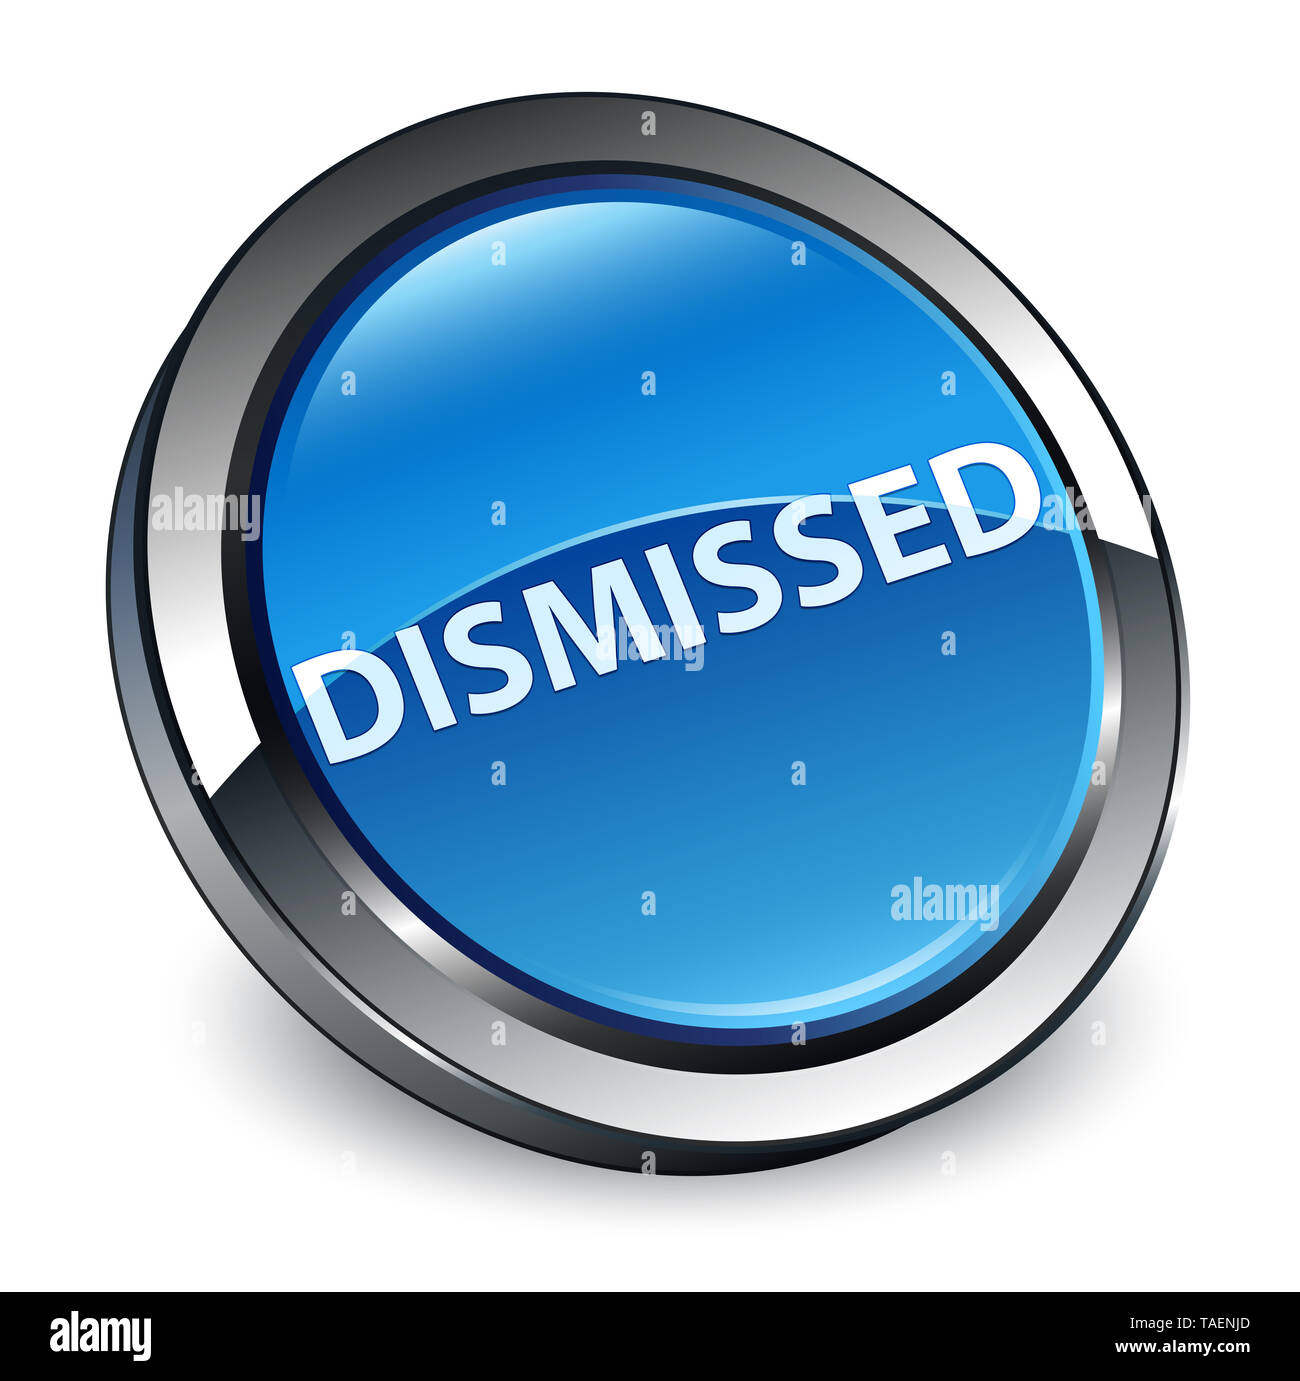 Dismissed isolated on 3d blue round button abstract illustration Stock Photo